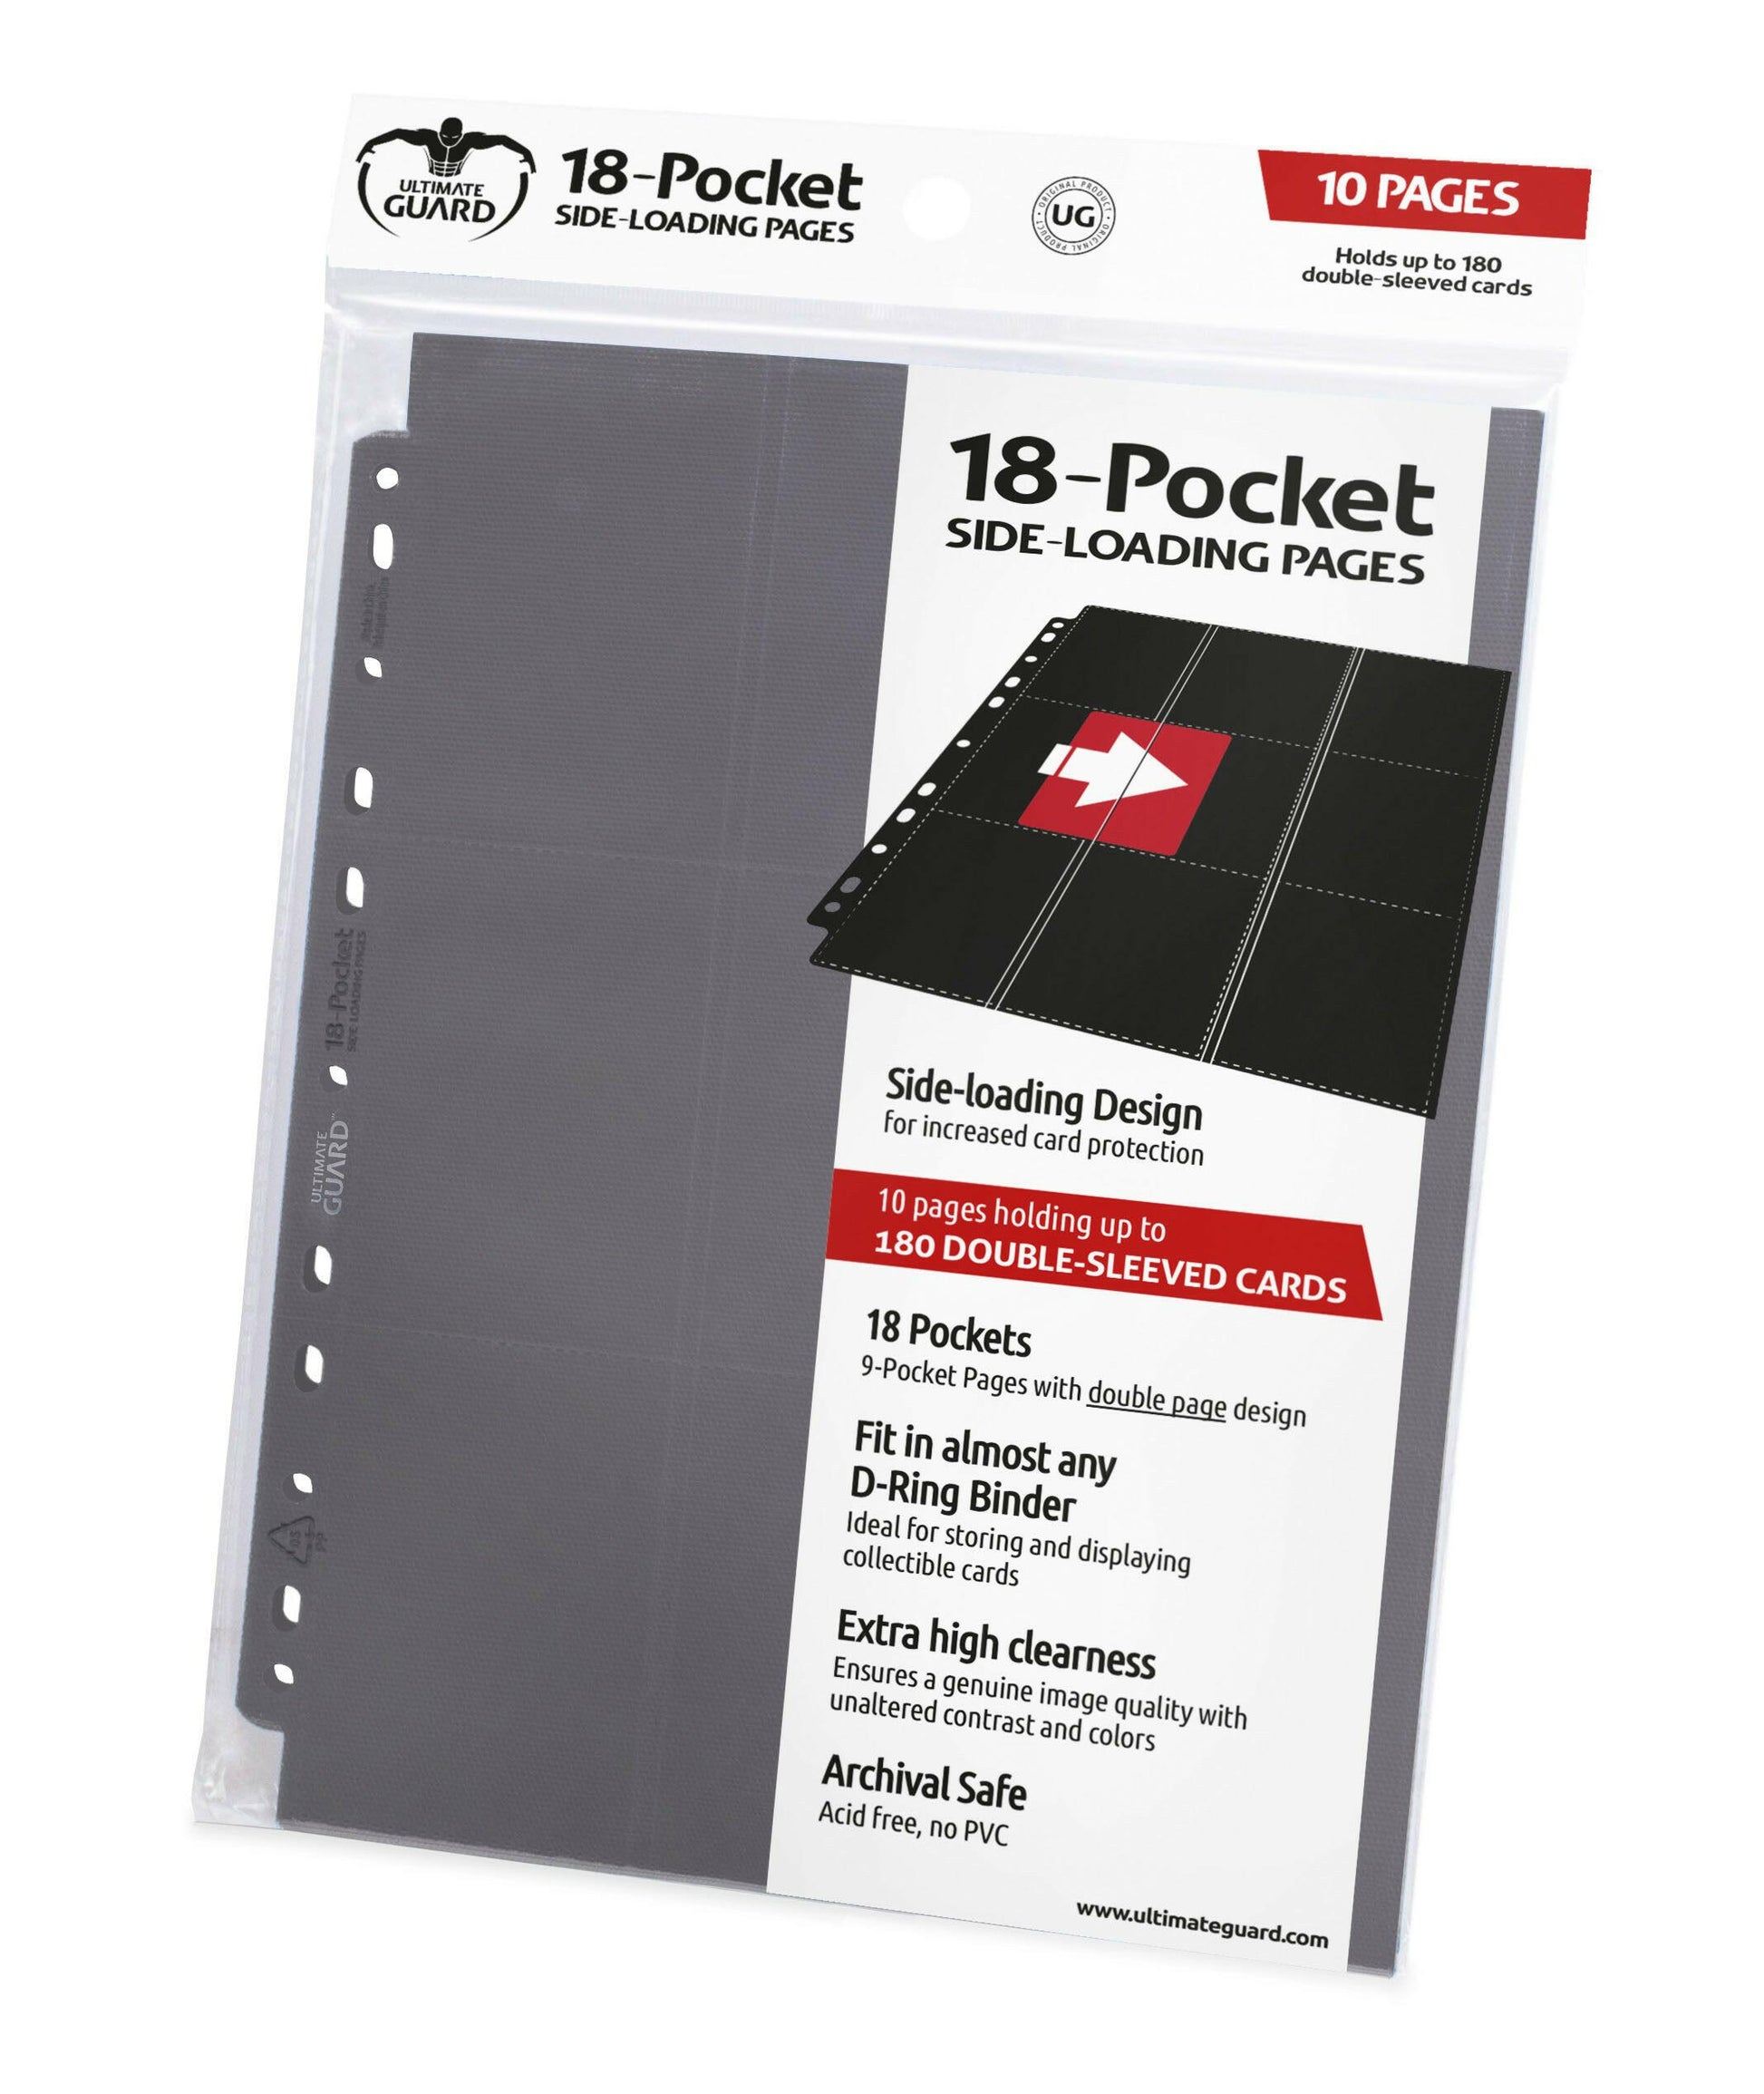 Ultimate Guard 18-Pocket Pages Side-Loading Grau (10) Ultimate Guard